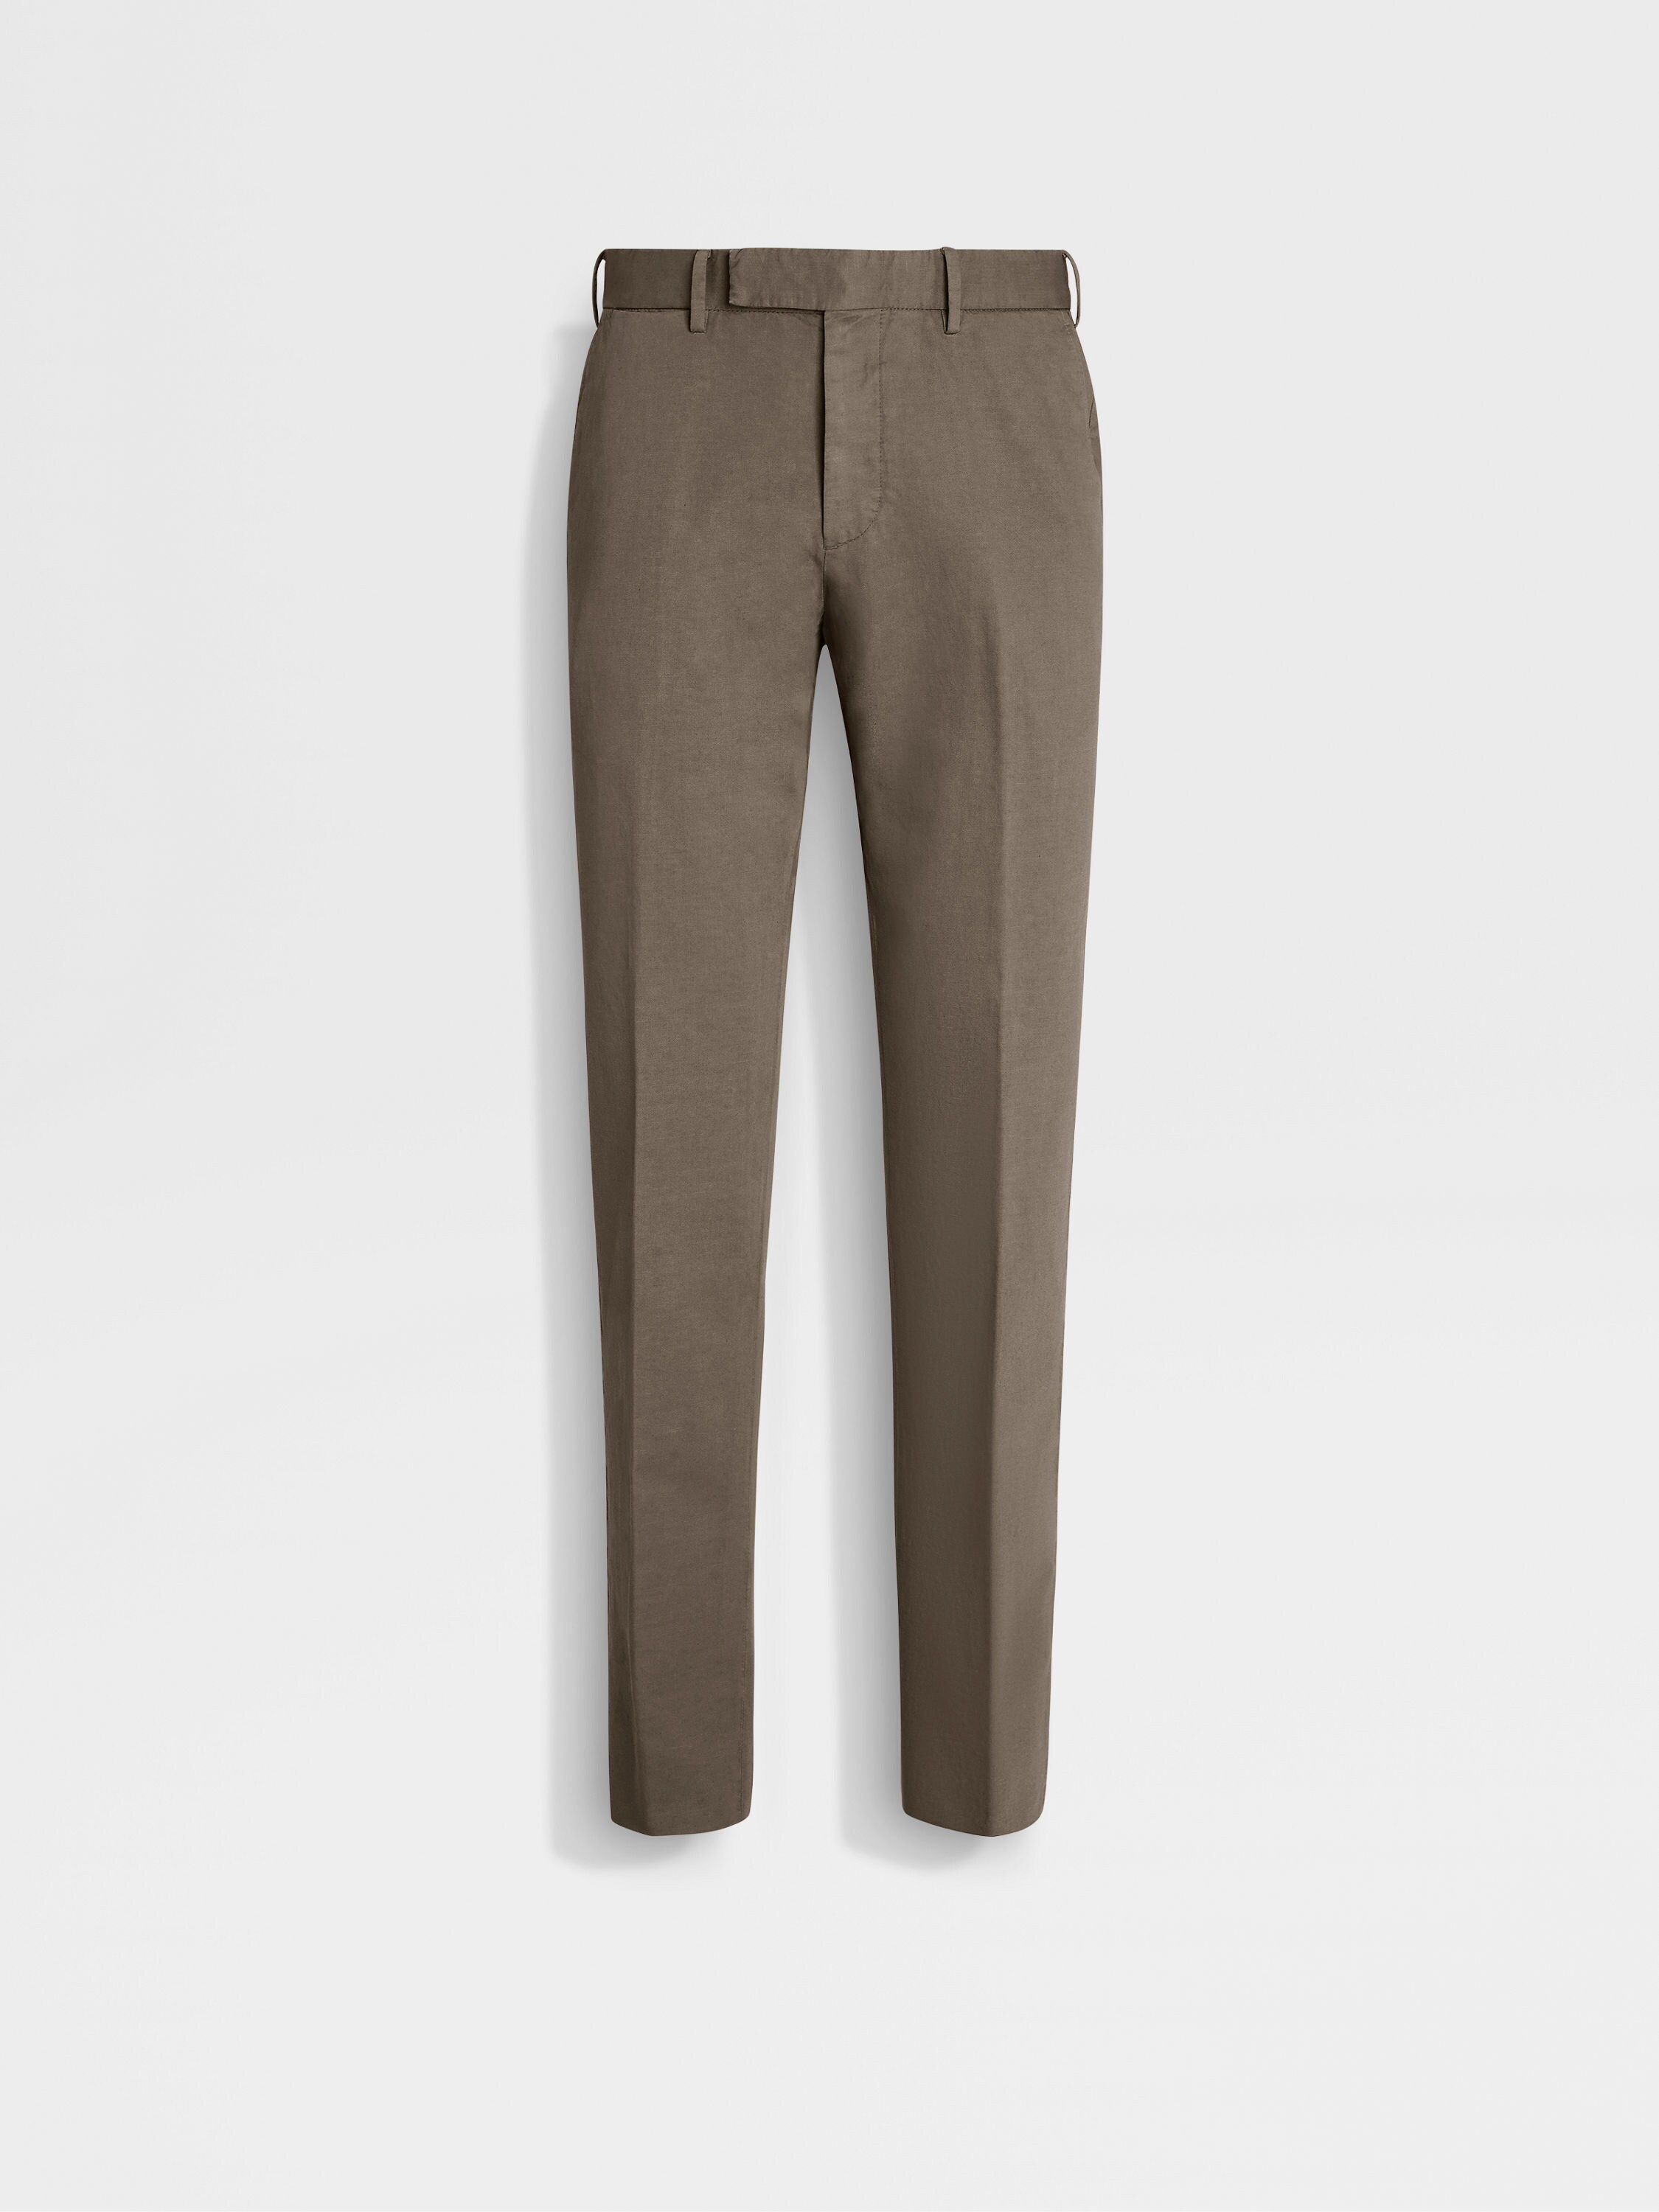 Dark Taupe Summer Chino Cotton and Linen Pants